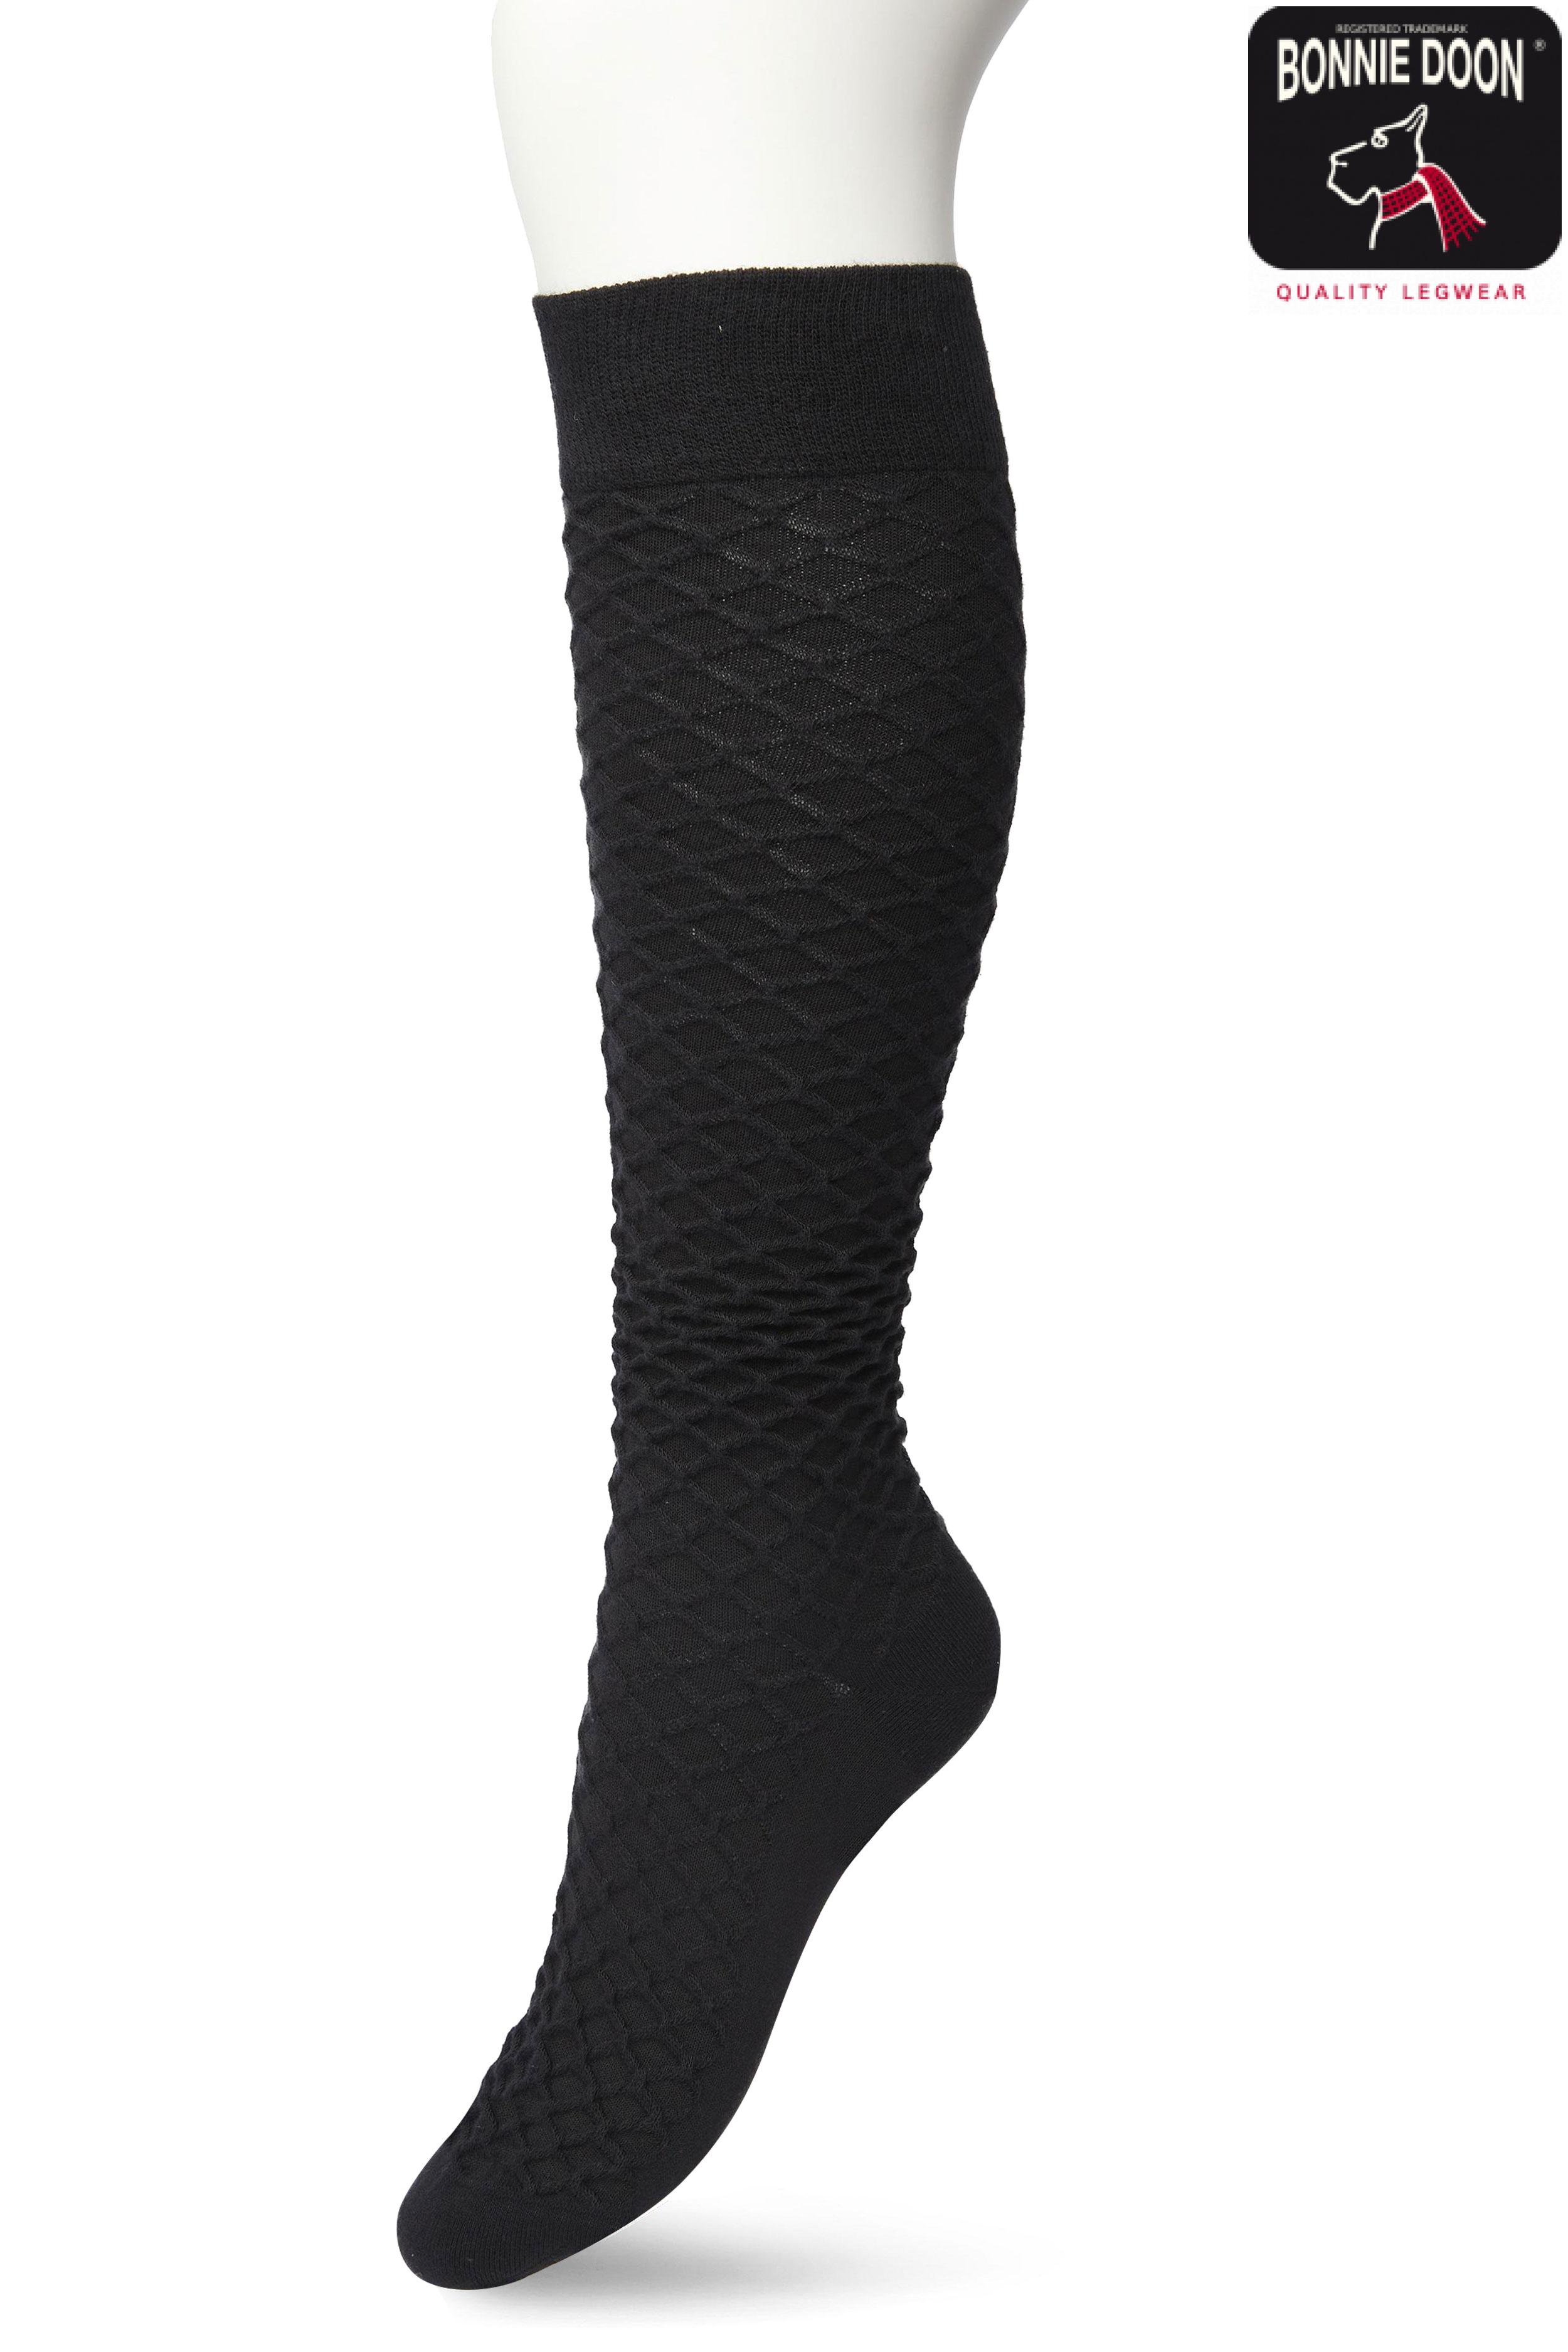 Cable knee high Black